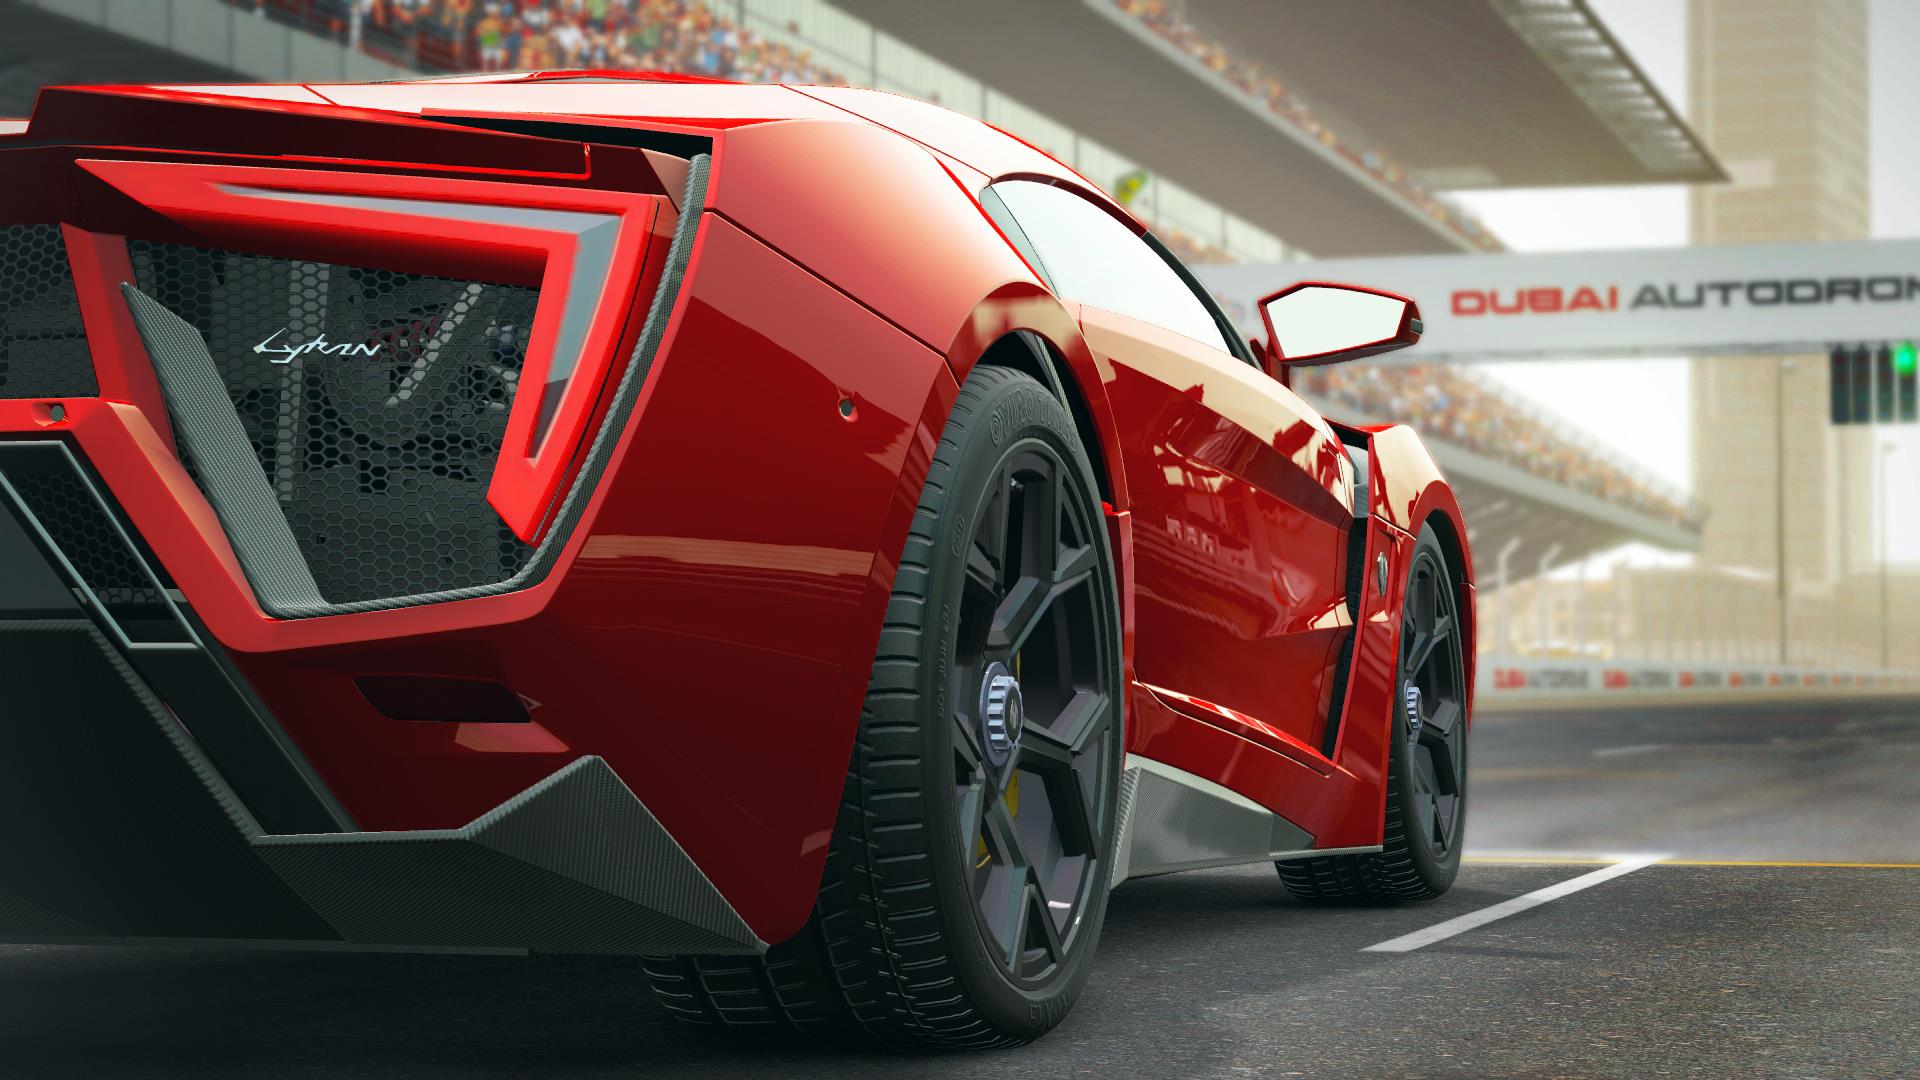 Image for This Project Cars video shows off the racer's multiplayer 